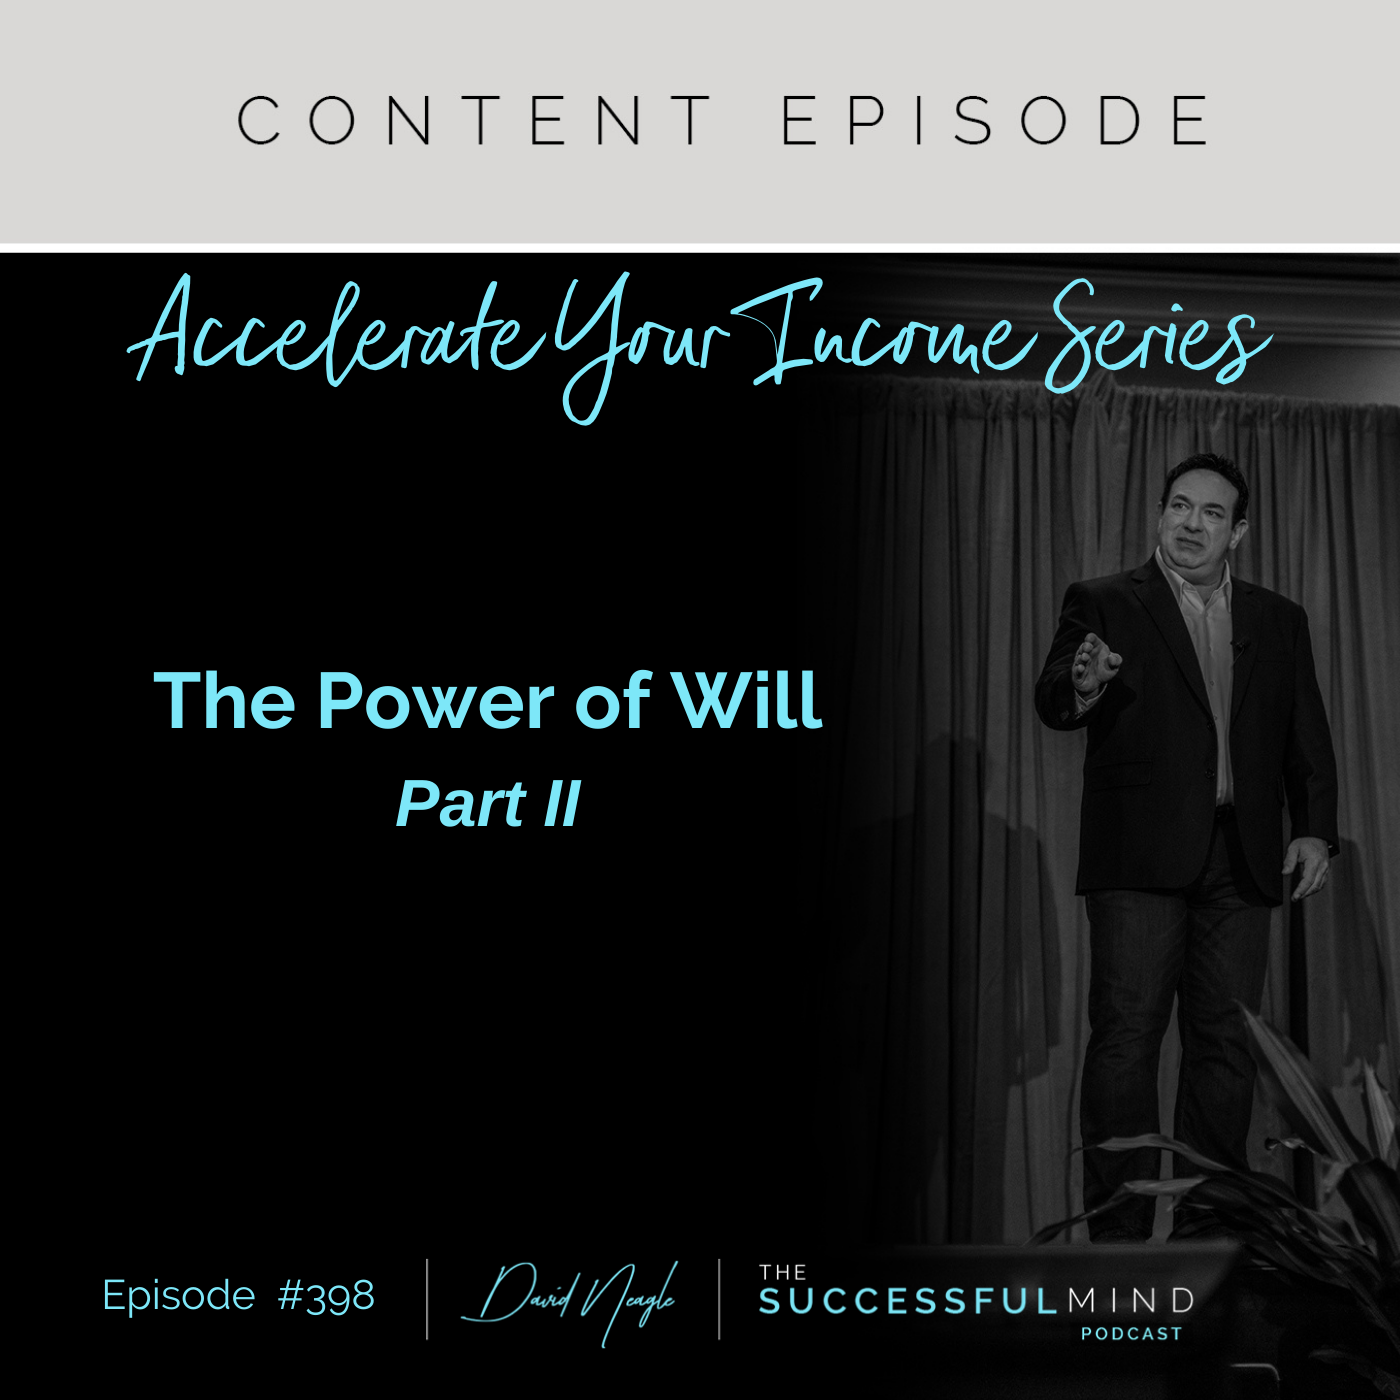 The Successful Mind Podcast - Episode 398 - Accelerate Your Income Series: The Power of Will - Part II